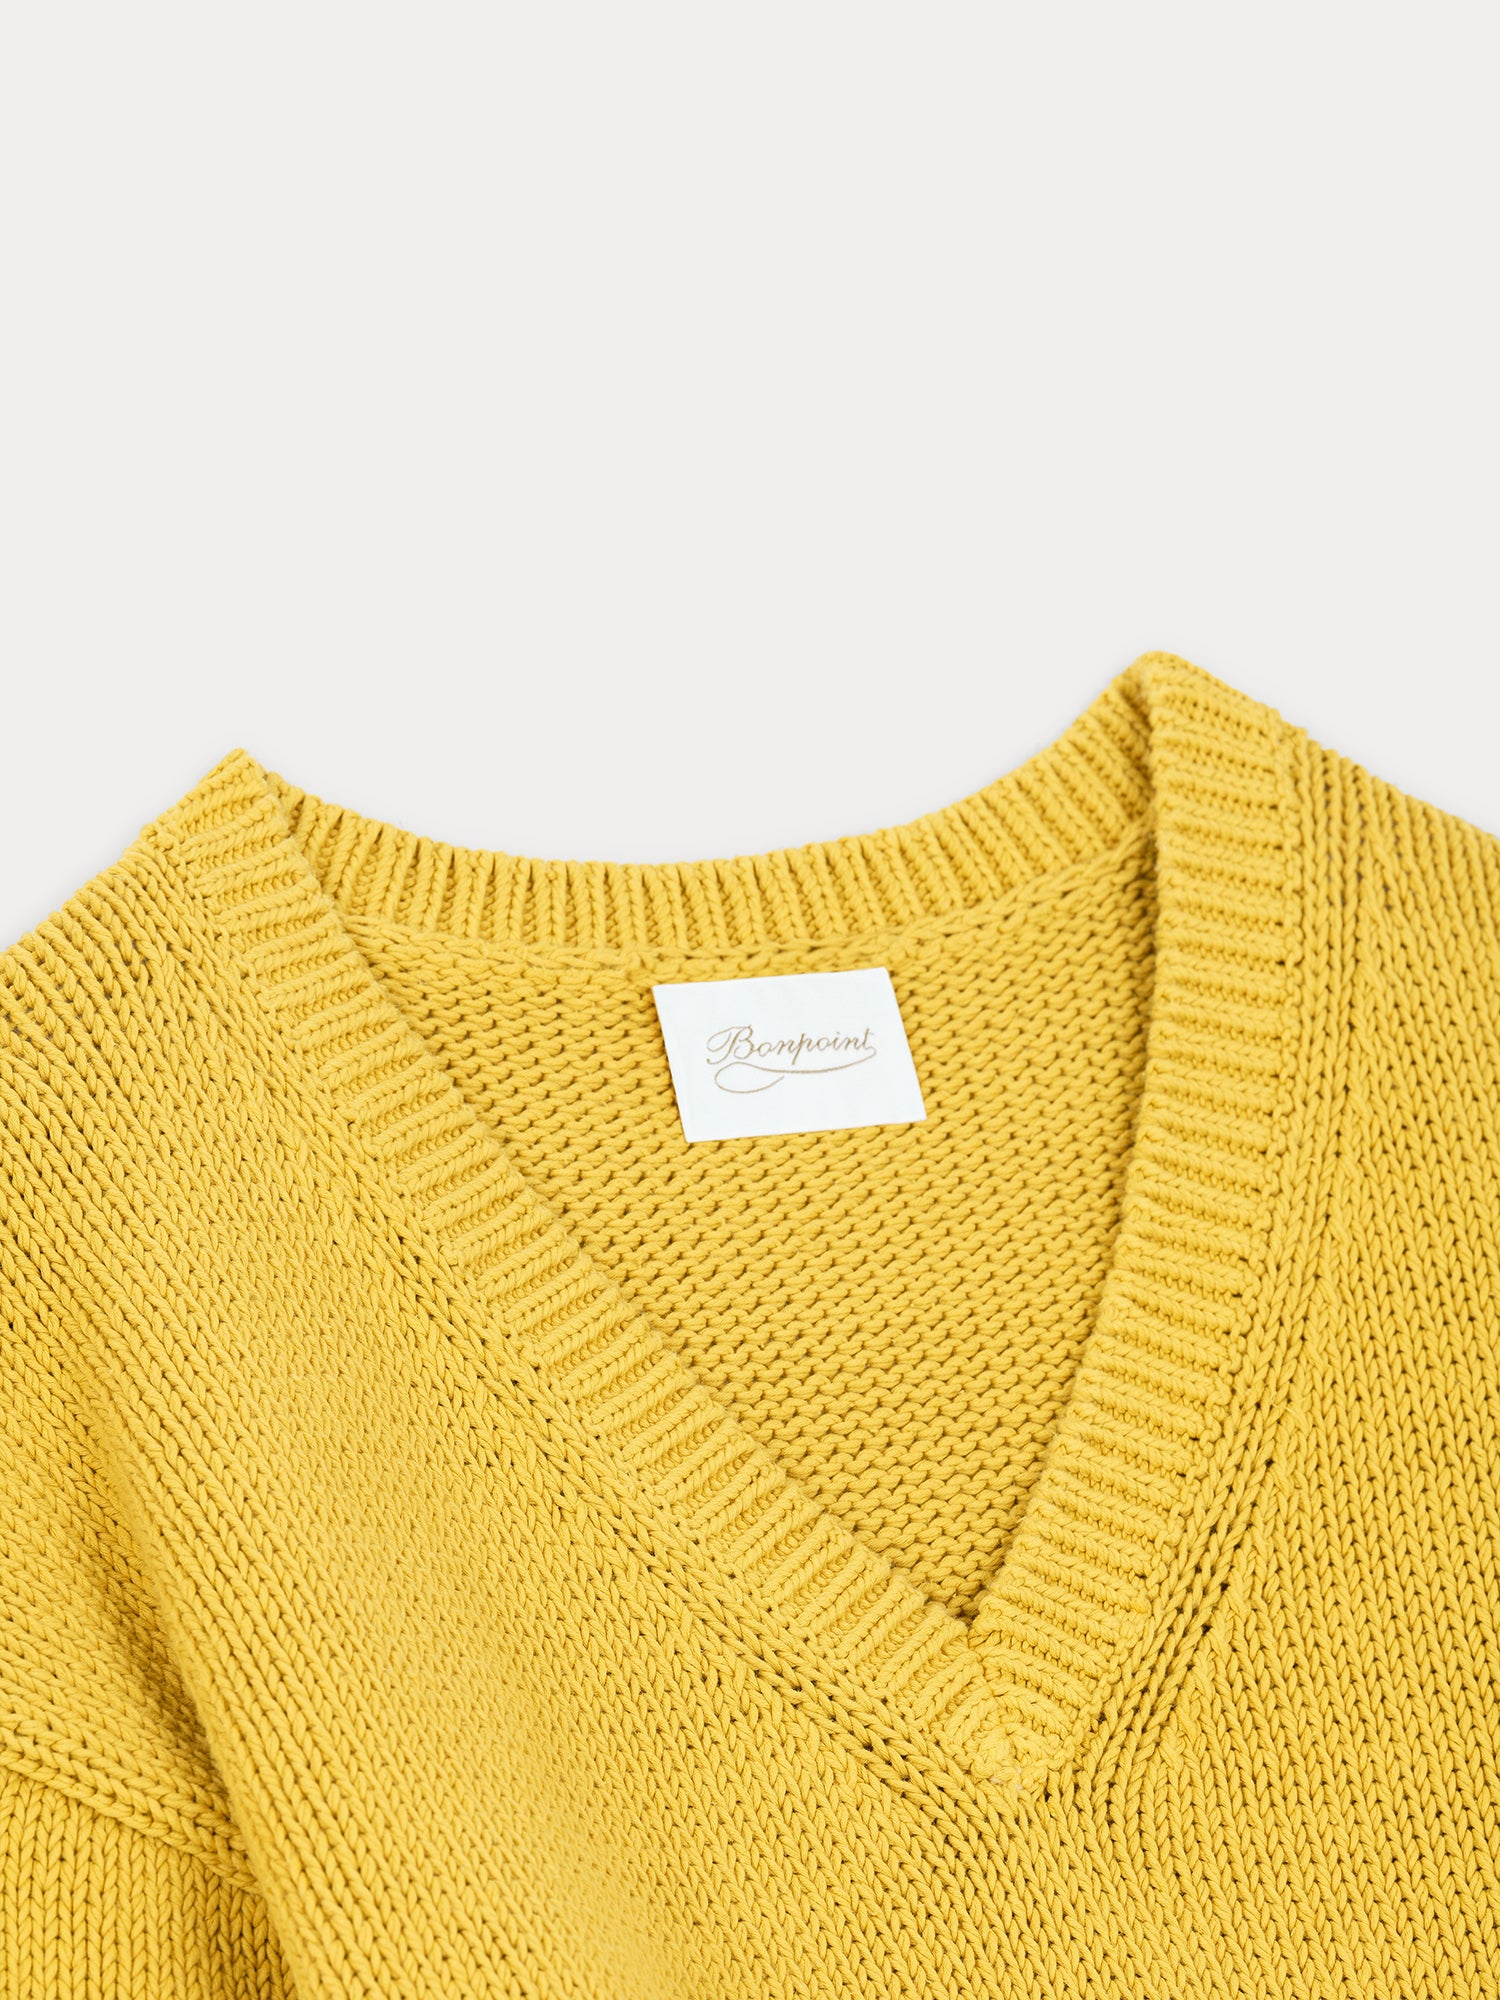 Chunky knit v-neck sweater in yellow cotton • Bonpoint